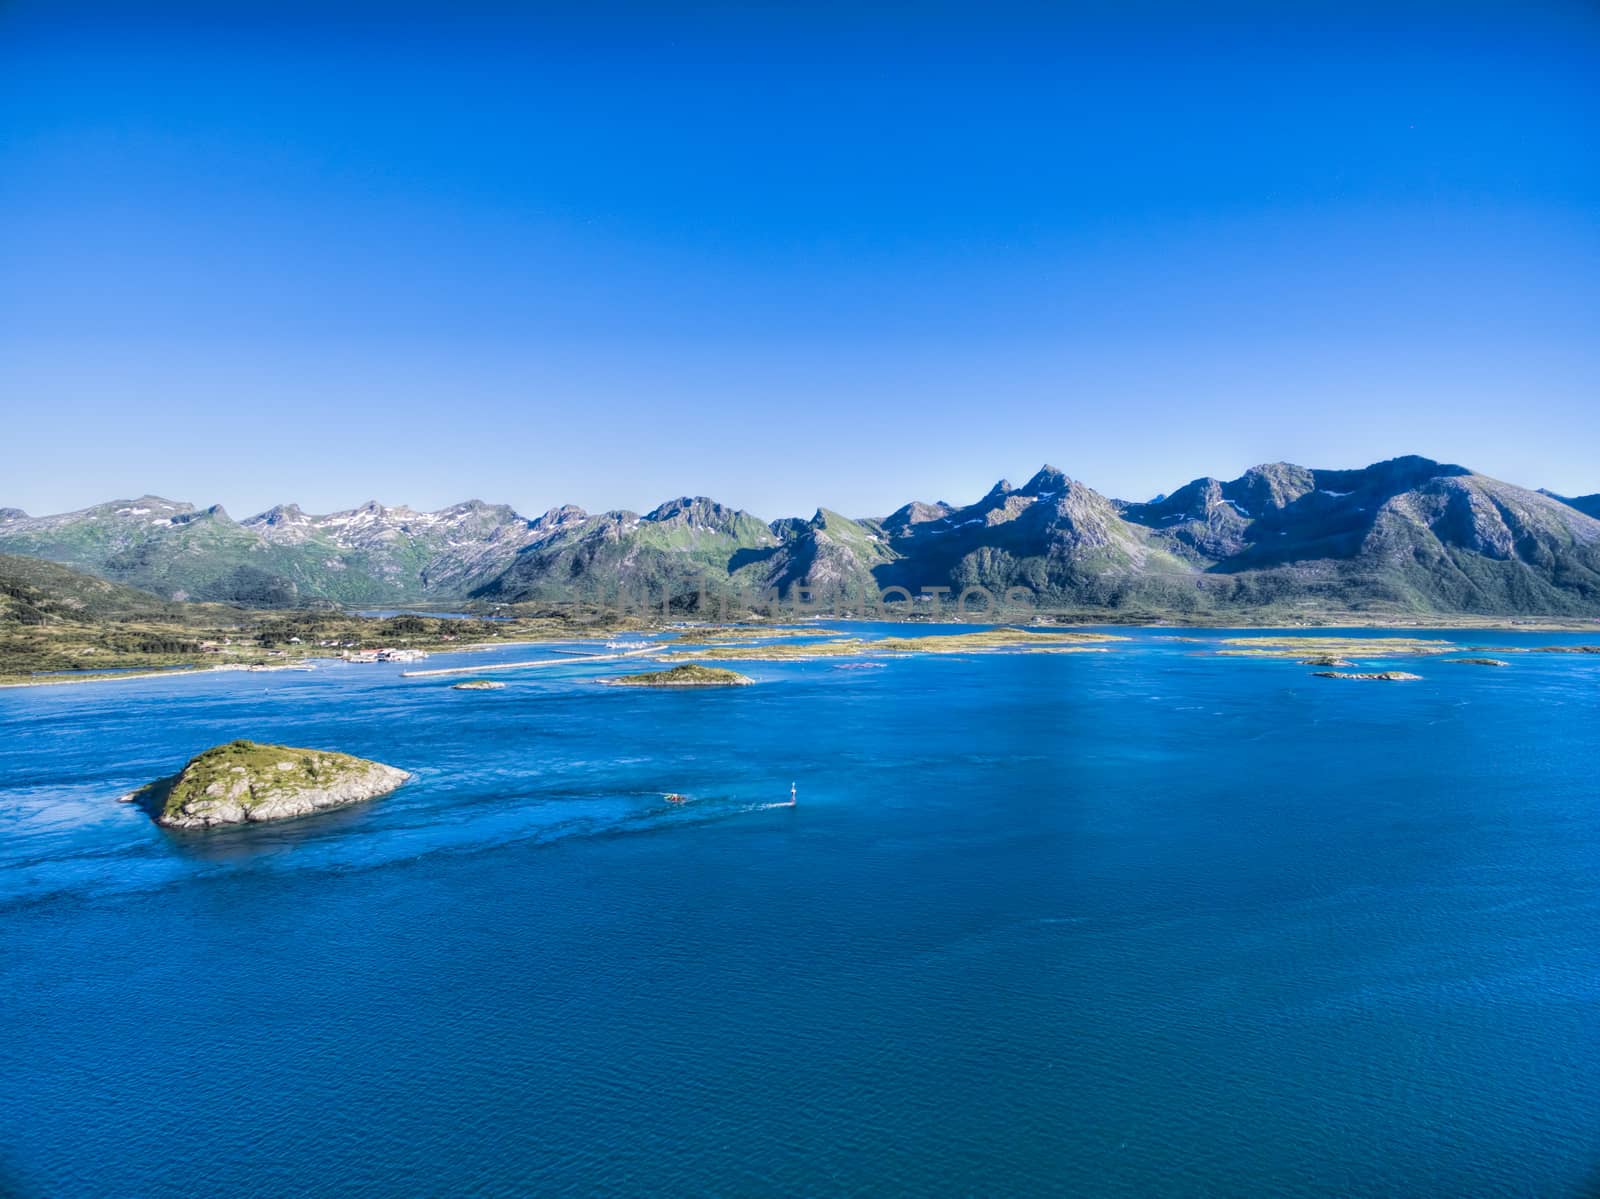 Scenic view of picturesque mountains on Lofoten islands in Norway